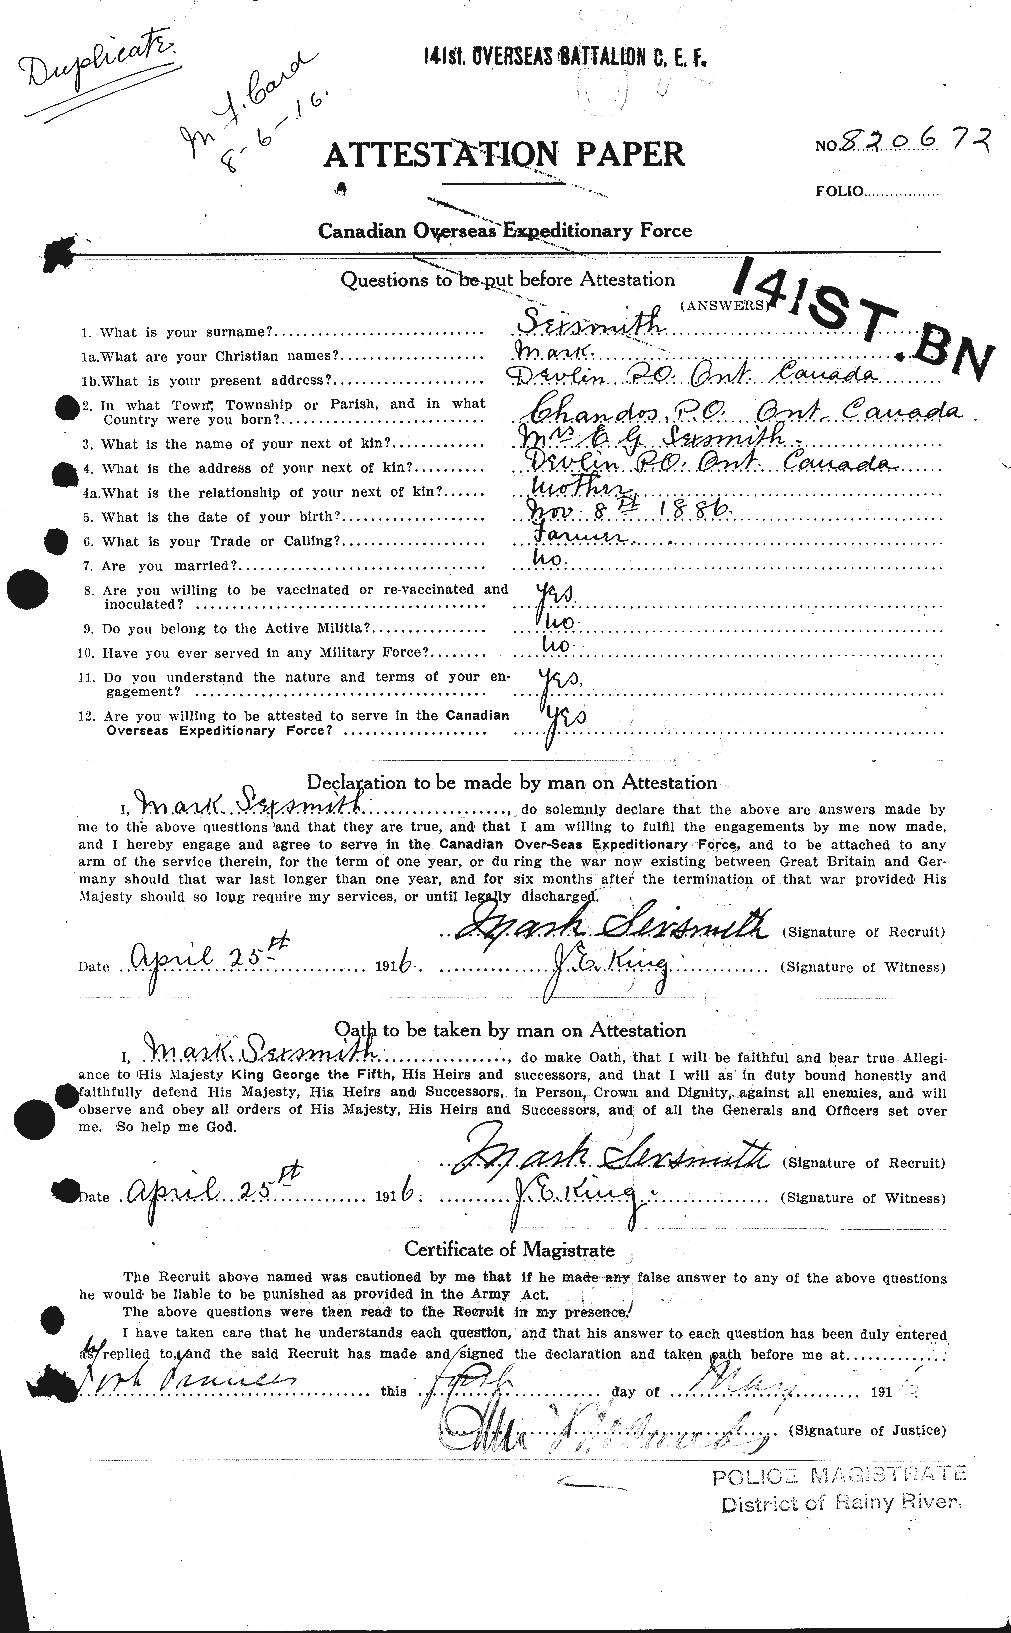 Personnel Records of the First World War - CEF 089556a